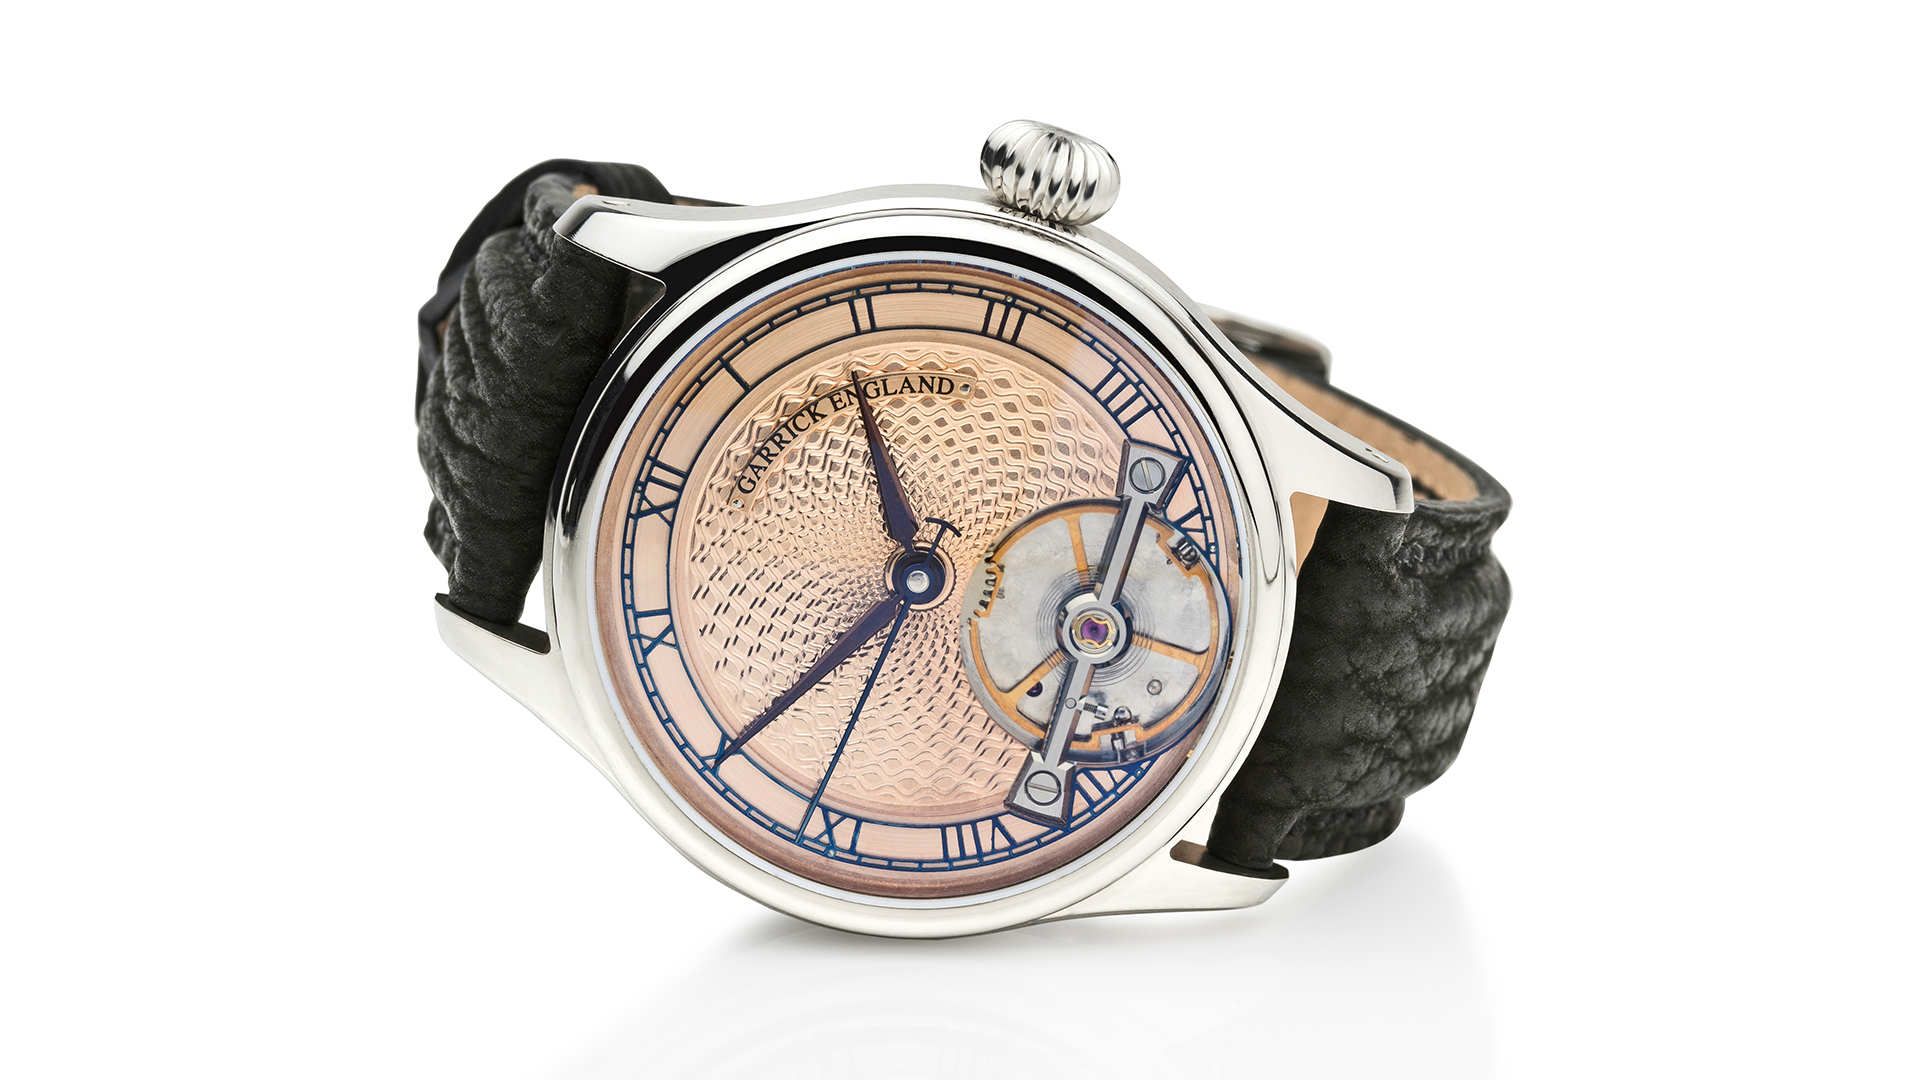 Garrick S2 watch with engine turned salmon dial 